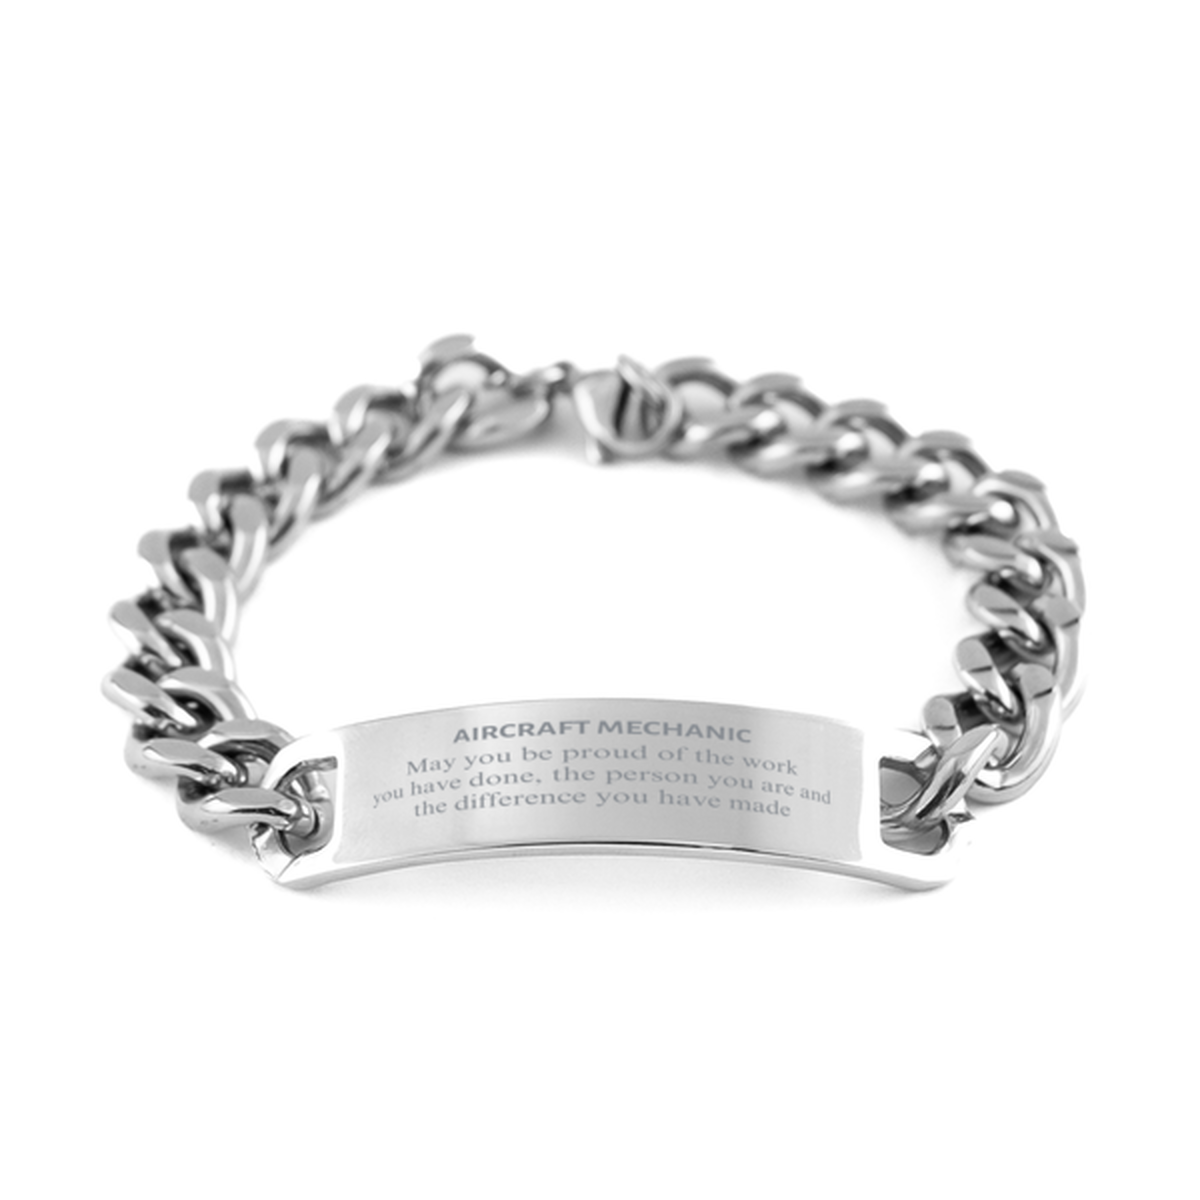 Aircraft Mechanic May you be proud of the work you have done, Retirement Aircraft Mechanic Cuban Chain Stainless Steel Bracelet for Colleague Appreciation Gifts Amazing for Aircraft Mechanic